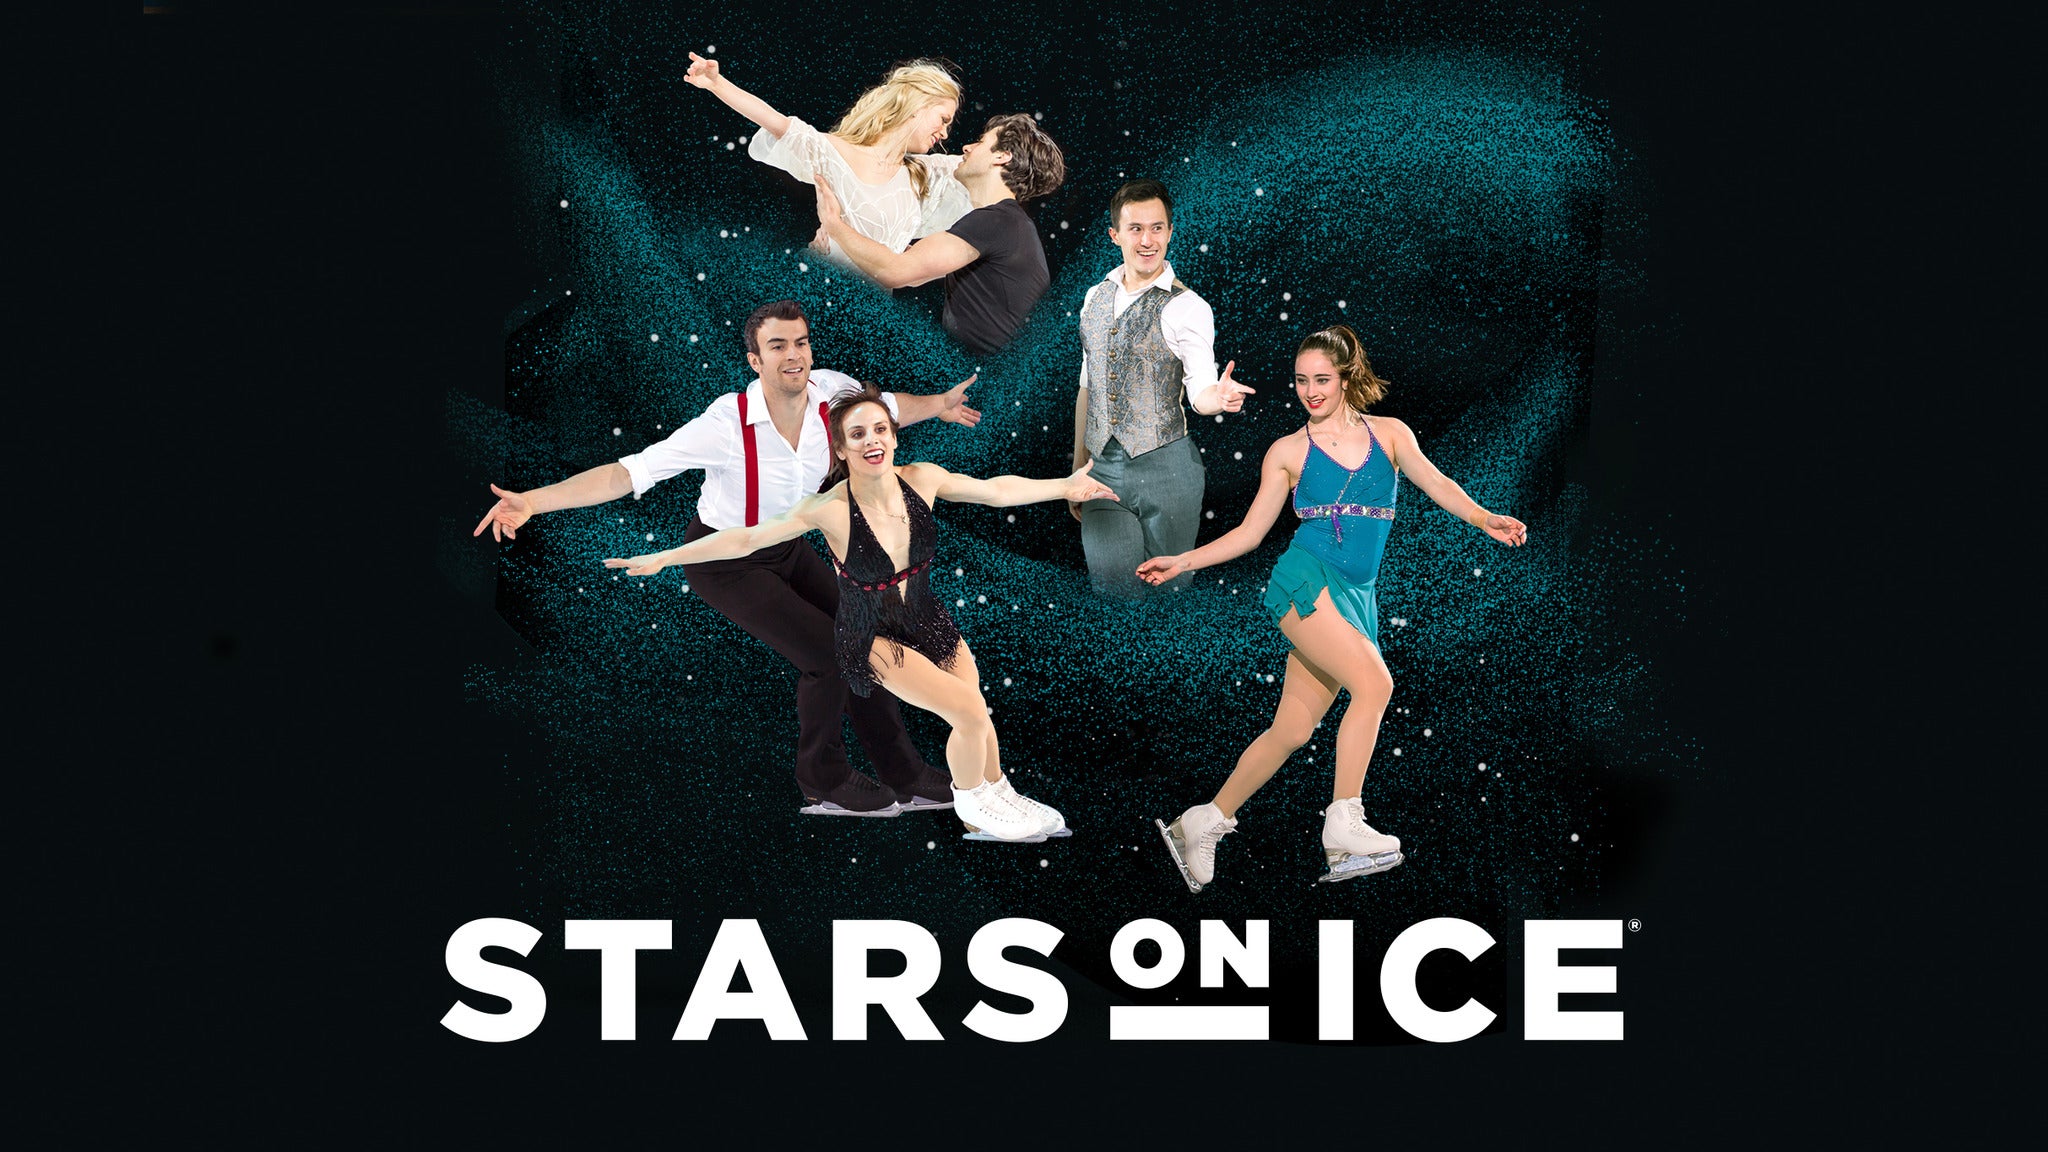 Stars on Ice - Canada in Vancouver promo photo for Exclusive presale offer code